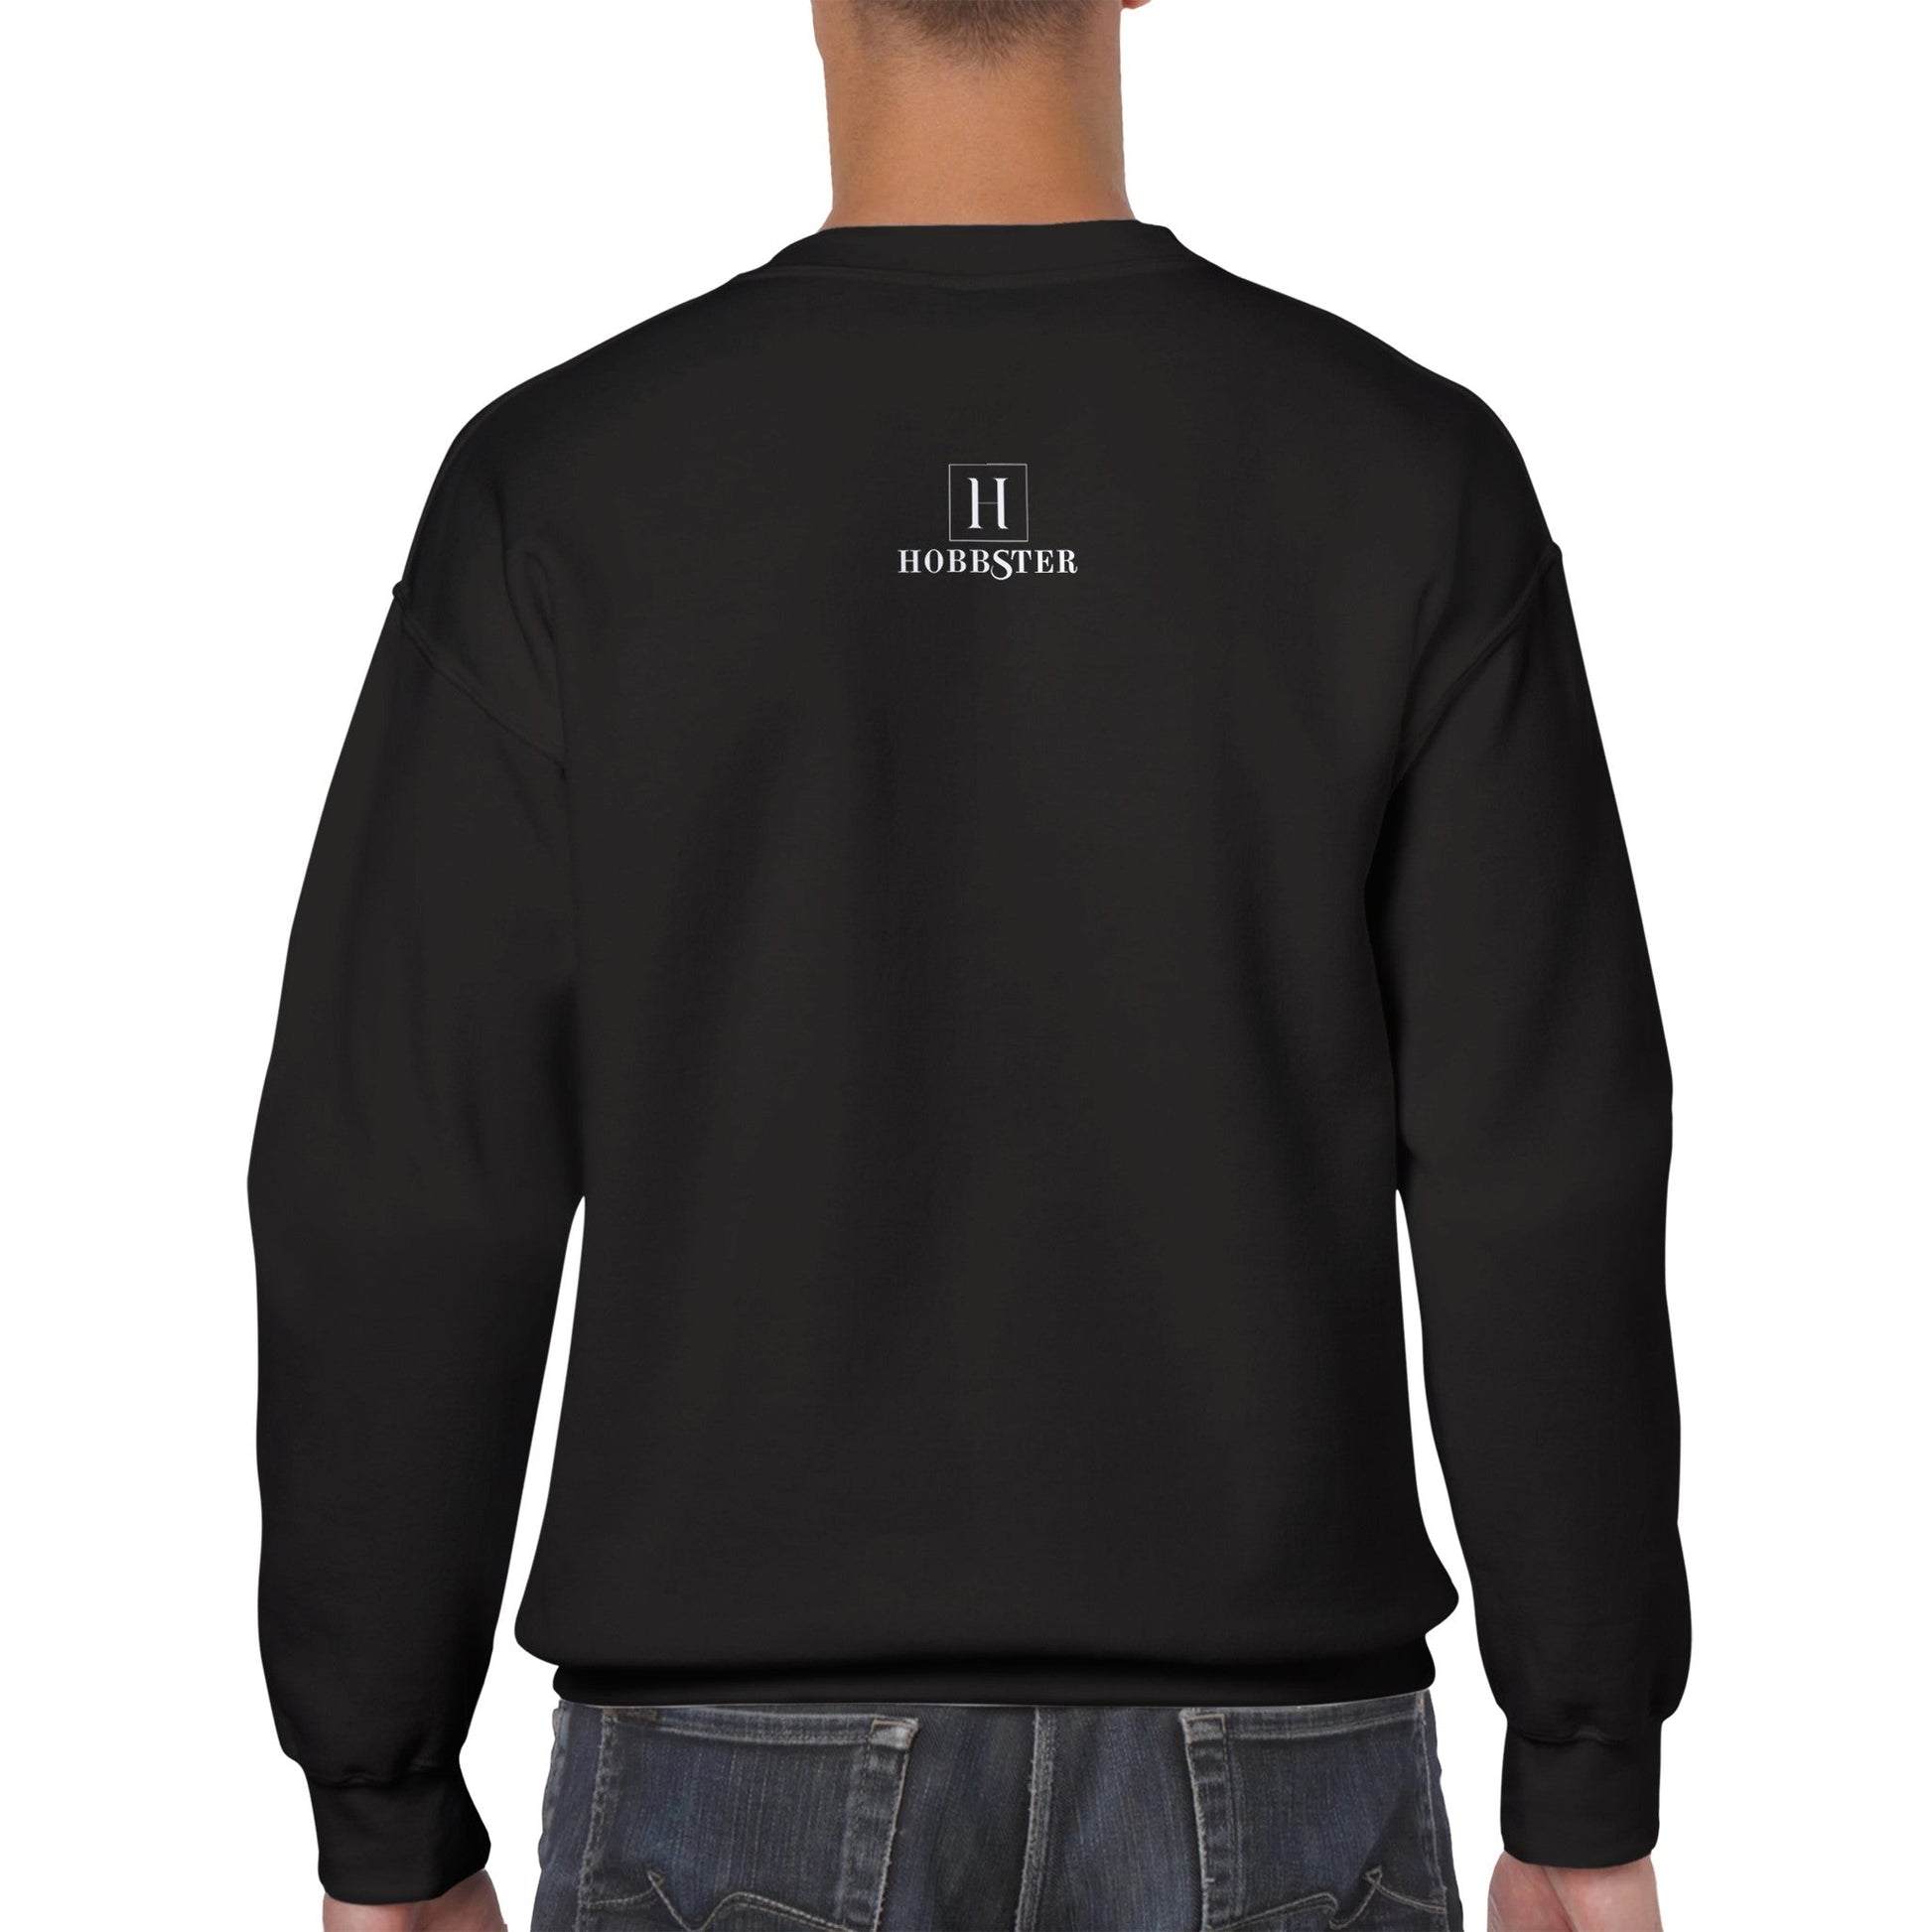 Men's Classic Crewneck Sweatshirt featuring Cottage Core Style Dogs Running Free Design - Hobbster